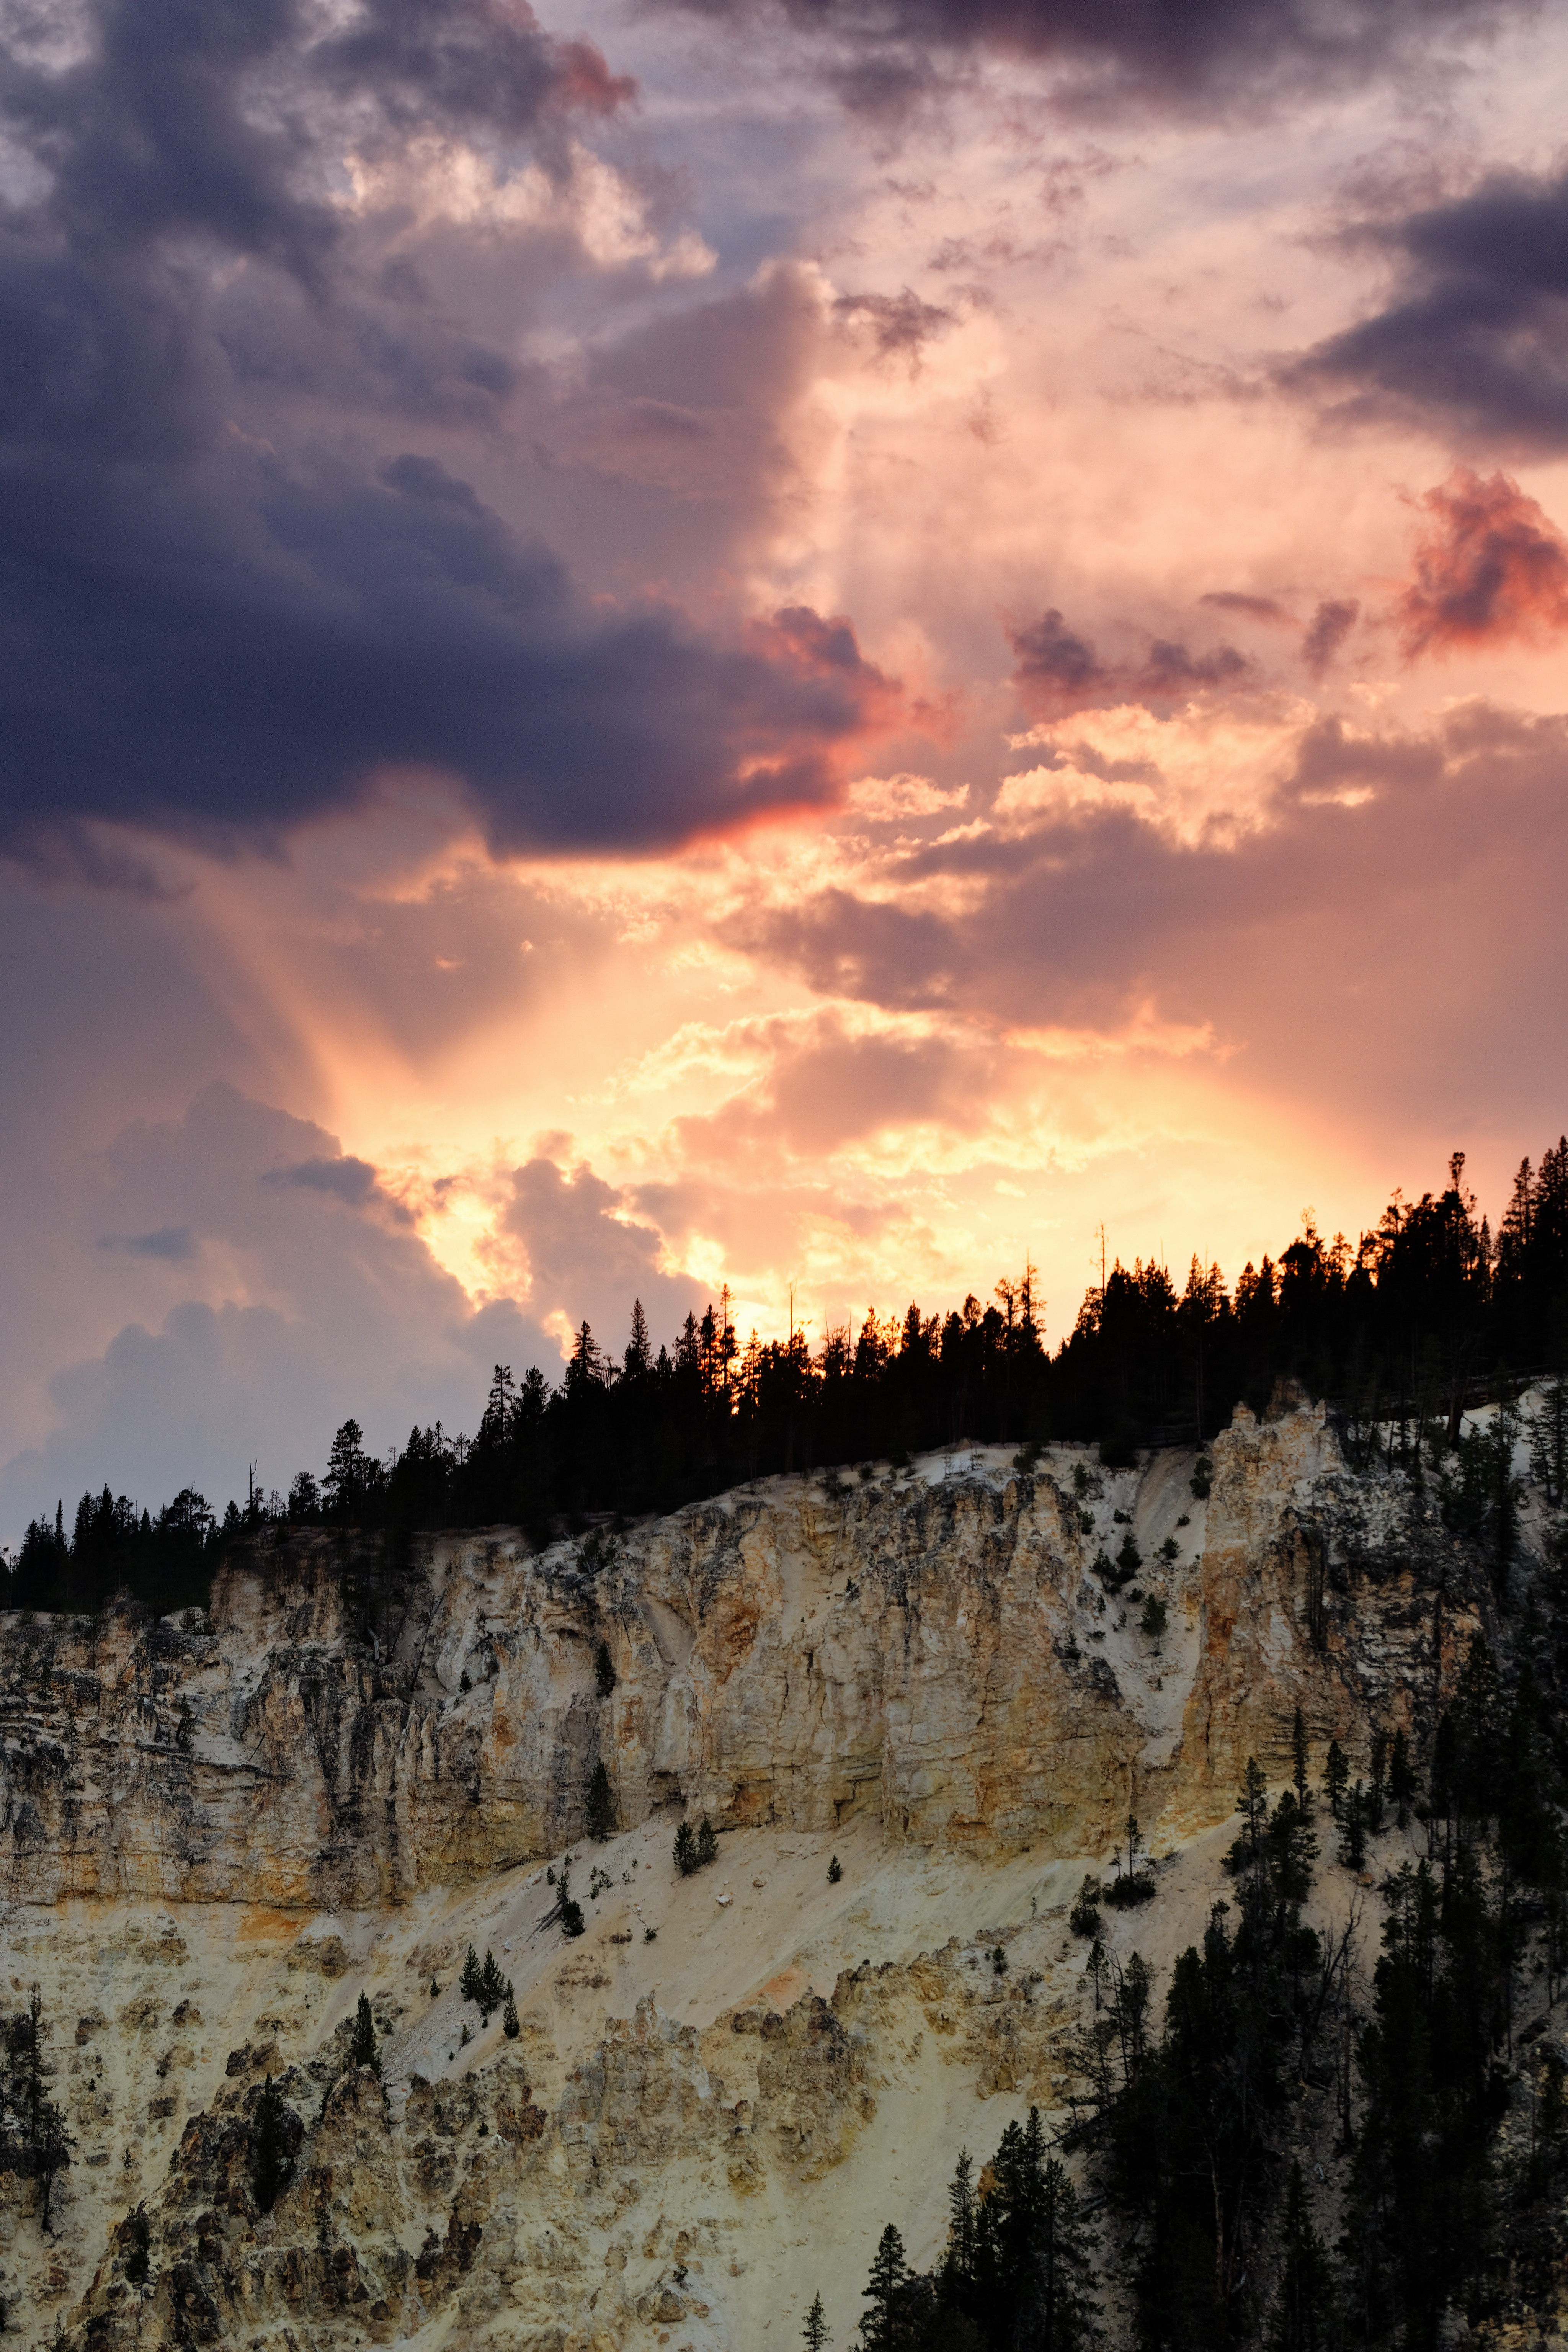 rocks, trees, nature, sunset, clouds, slope